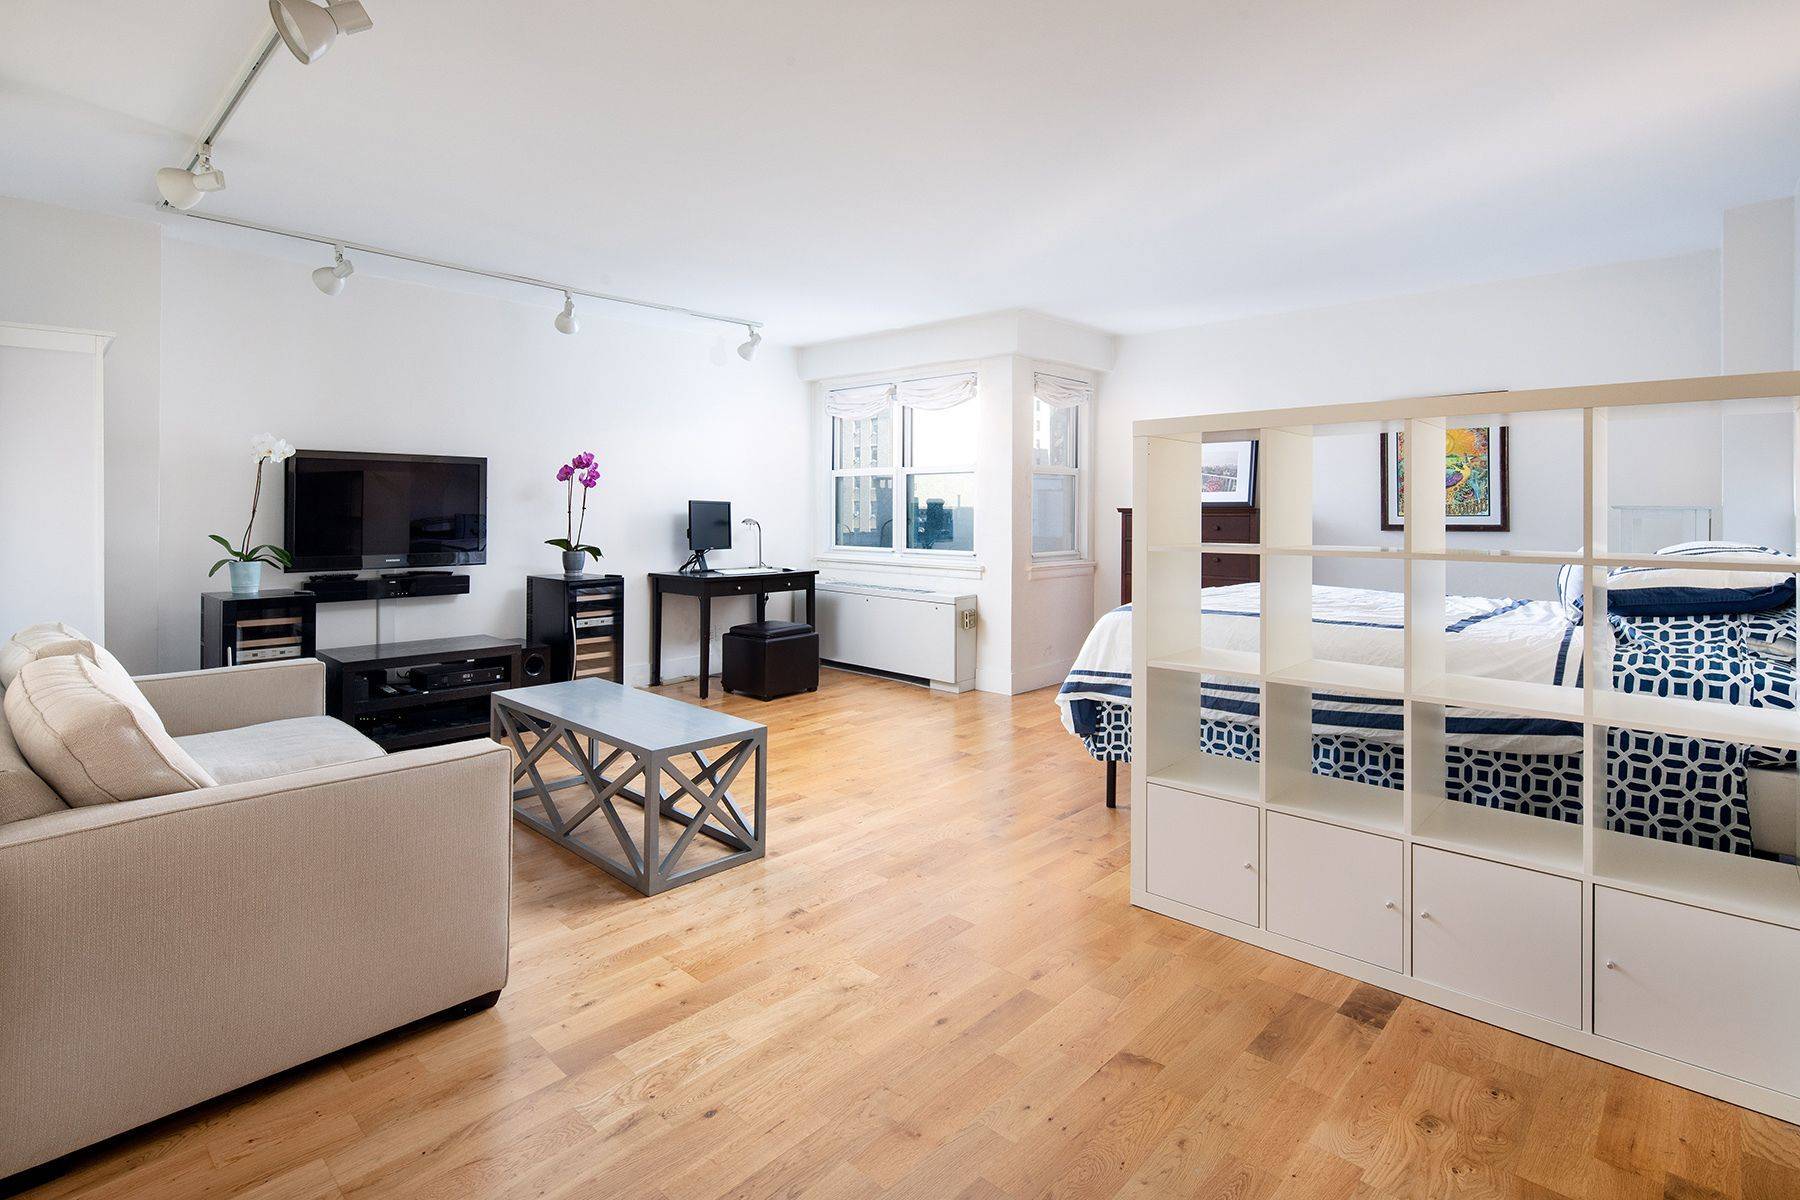 Stunning, extra large Studio in a Full Service Cooperative centrally located in the heart of Greenwich Village.